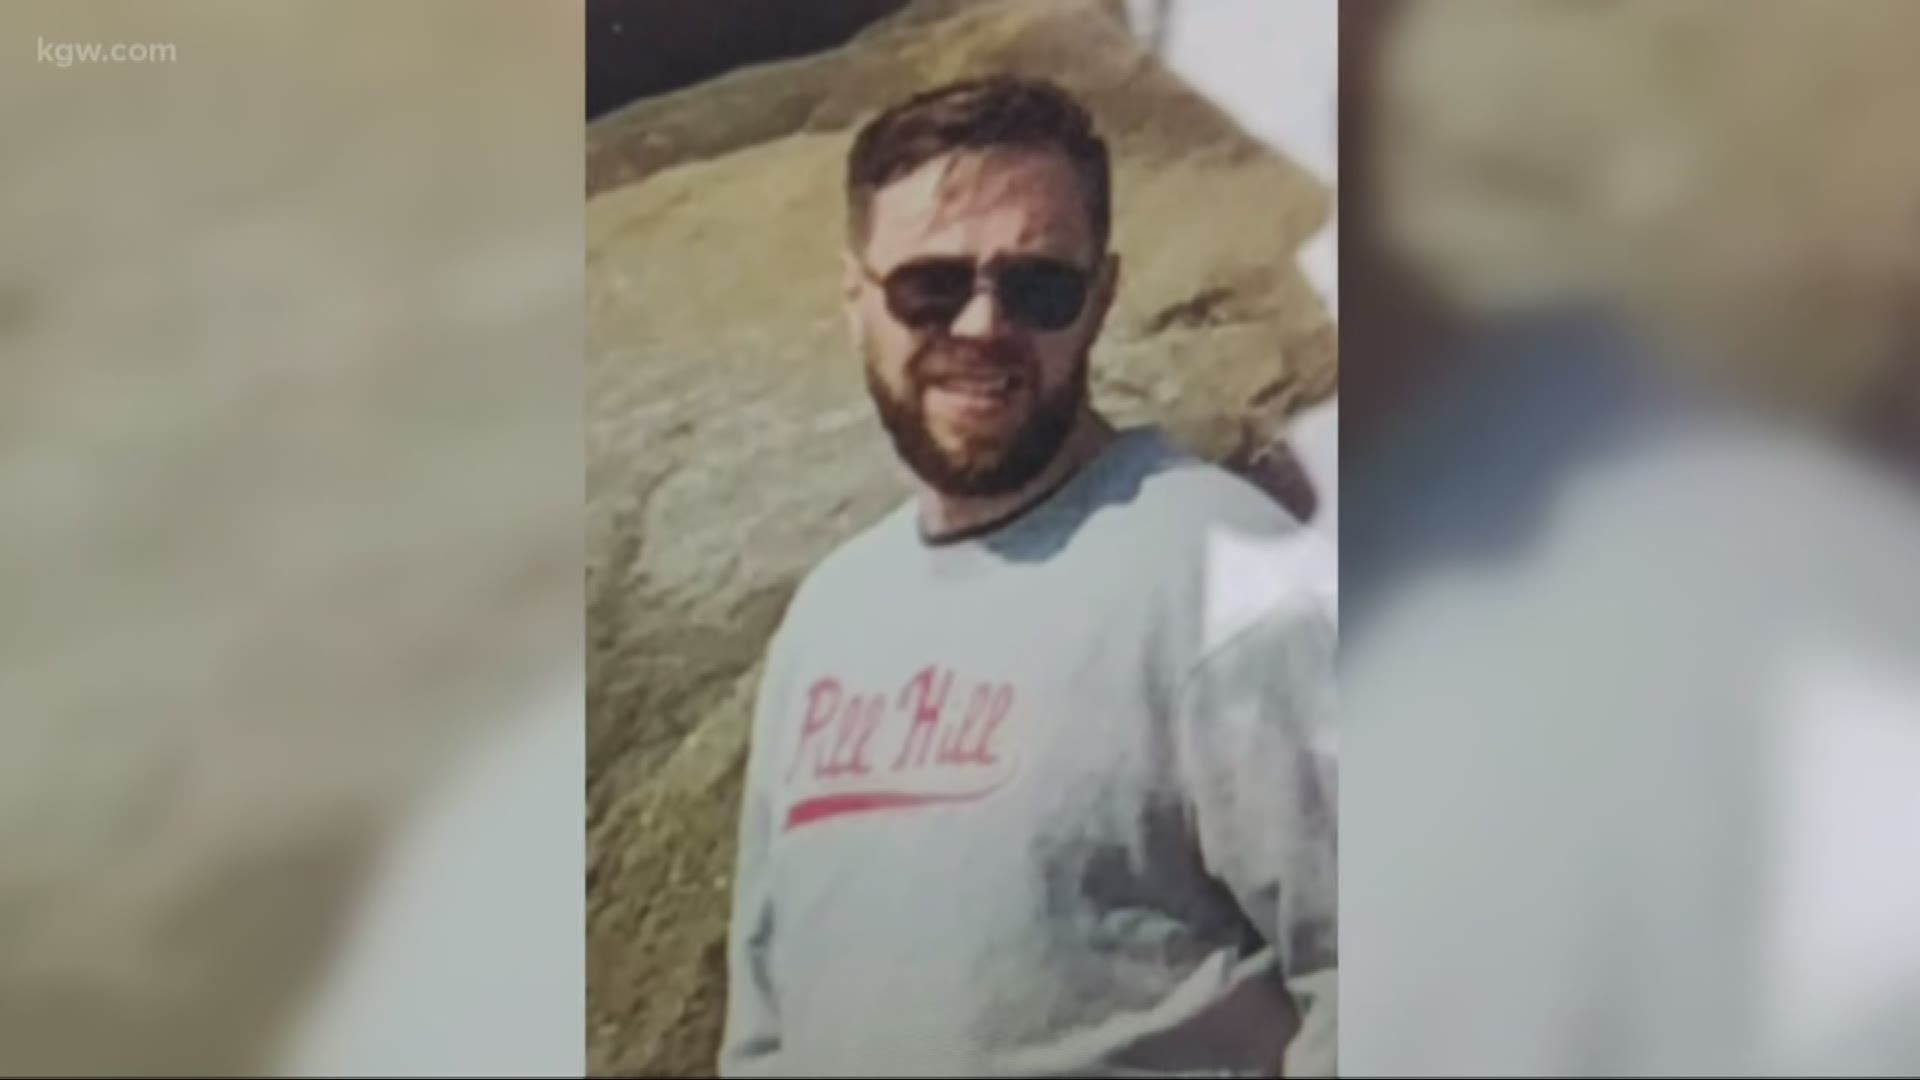 There's new hope in the search for a missing man near Mount St. Helens.